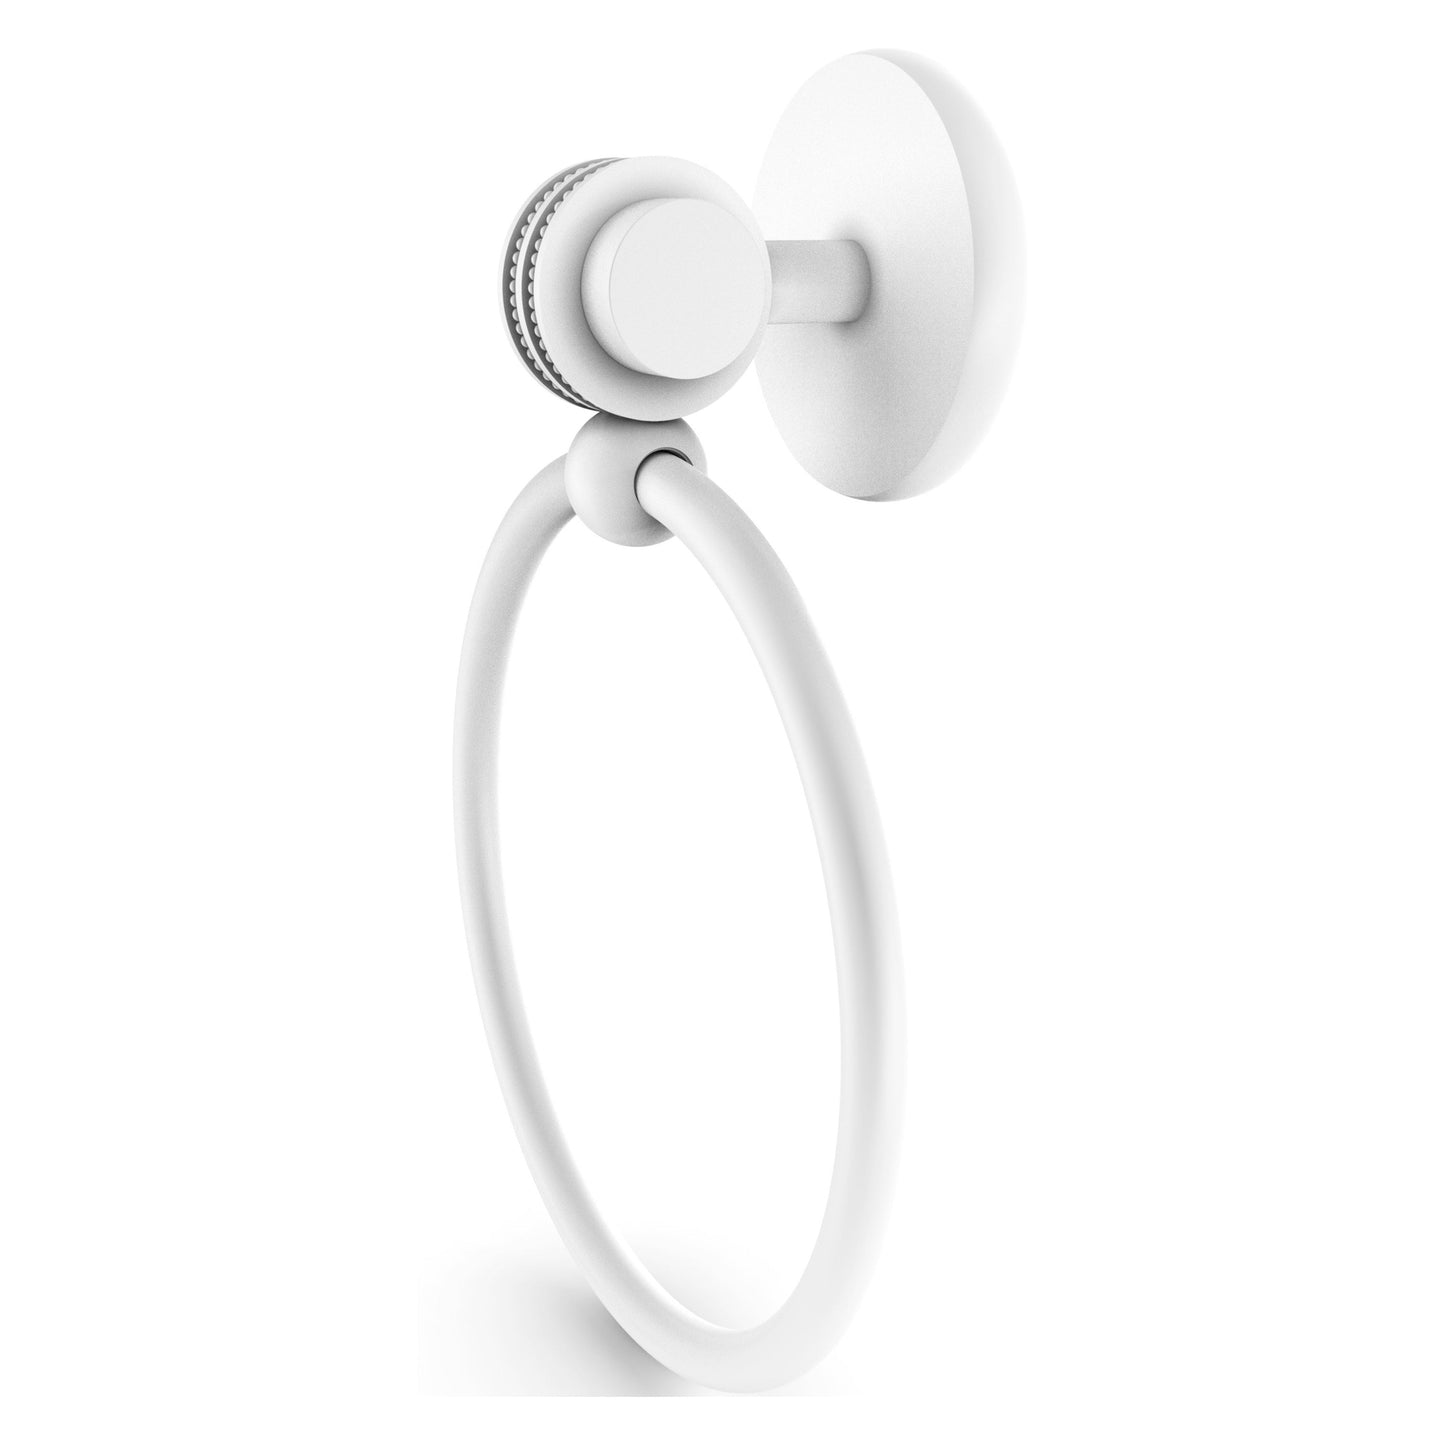 Allied Brass Satellite Orbit Two 6" x 3.5" Matte White Solid Brass Towel Ring With Dotted Accent